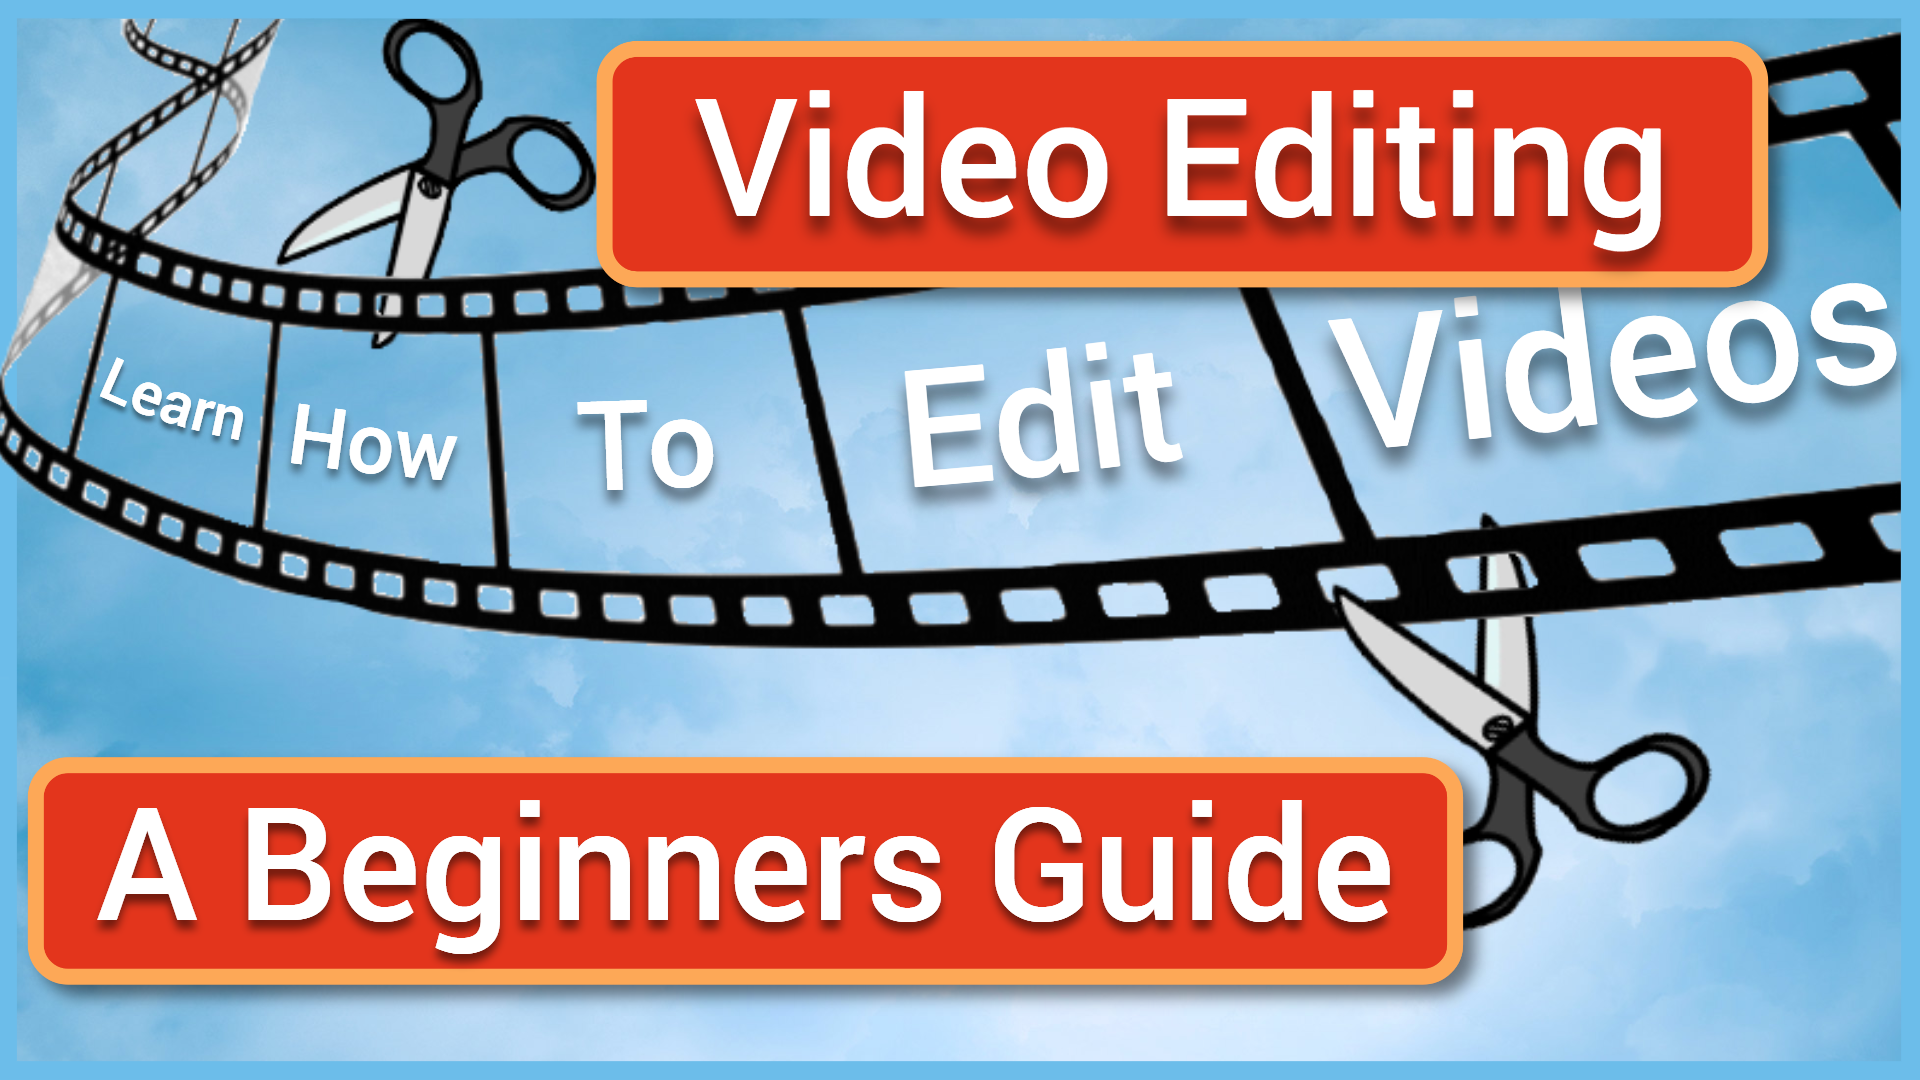 Video Editing A Beginner's Guide